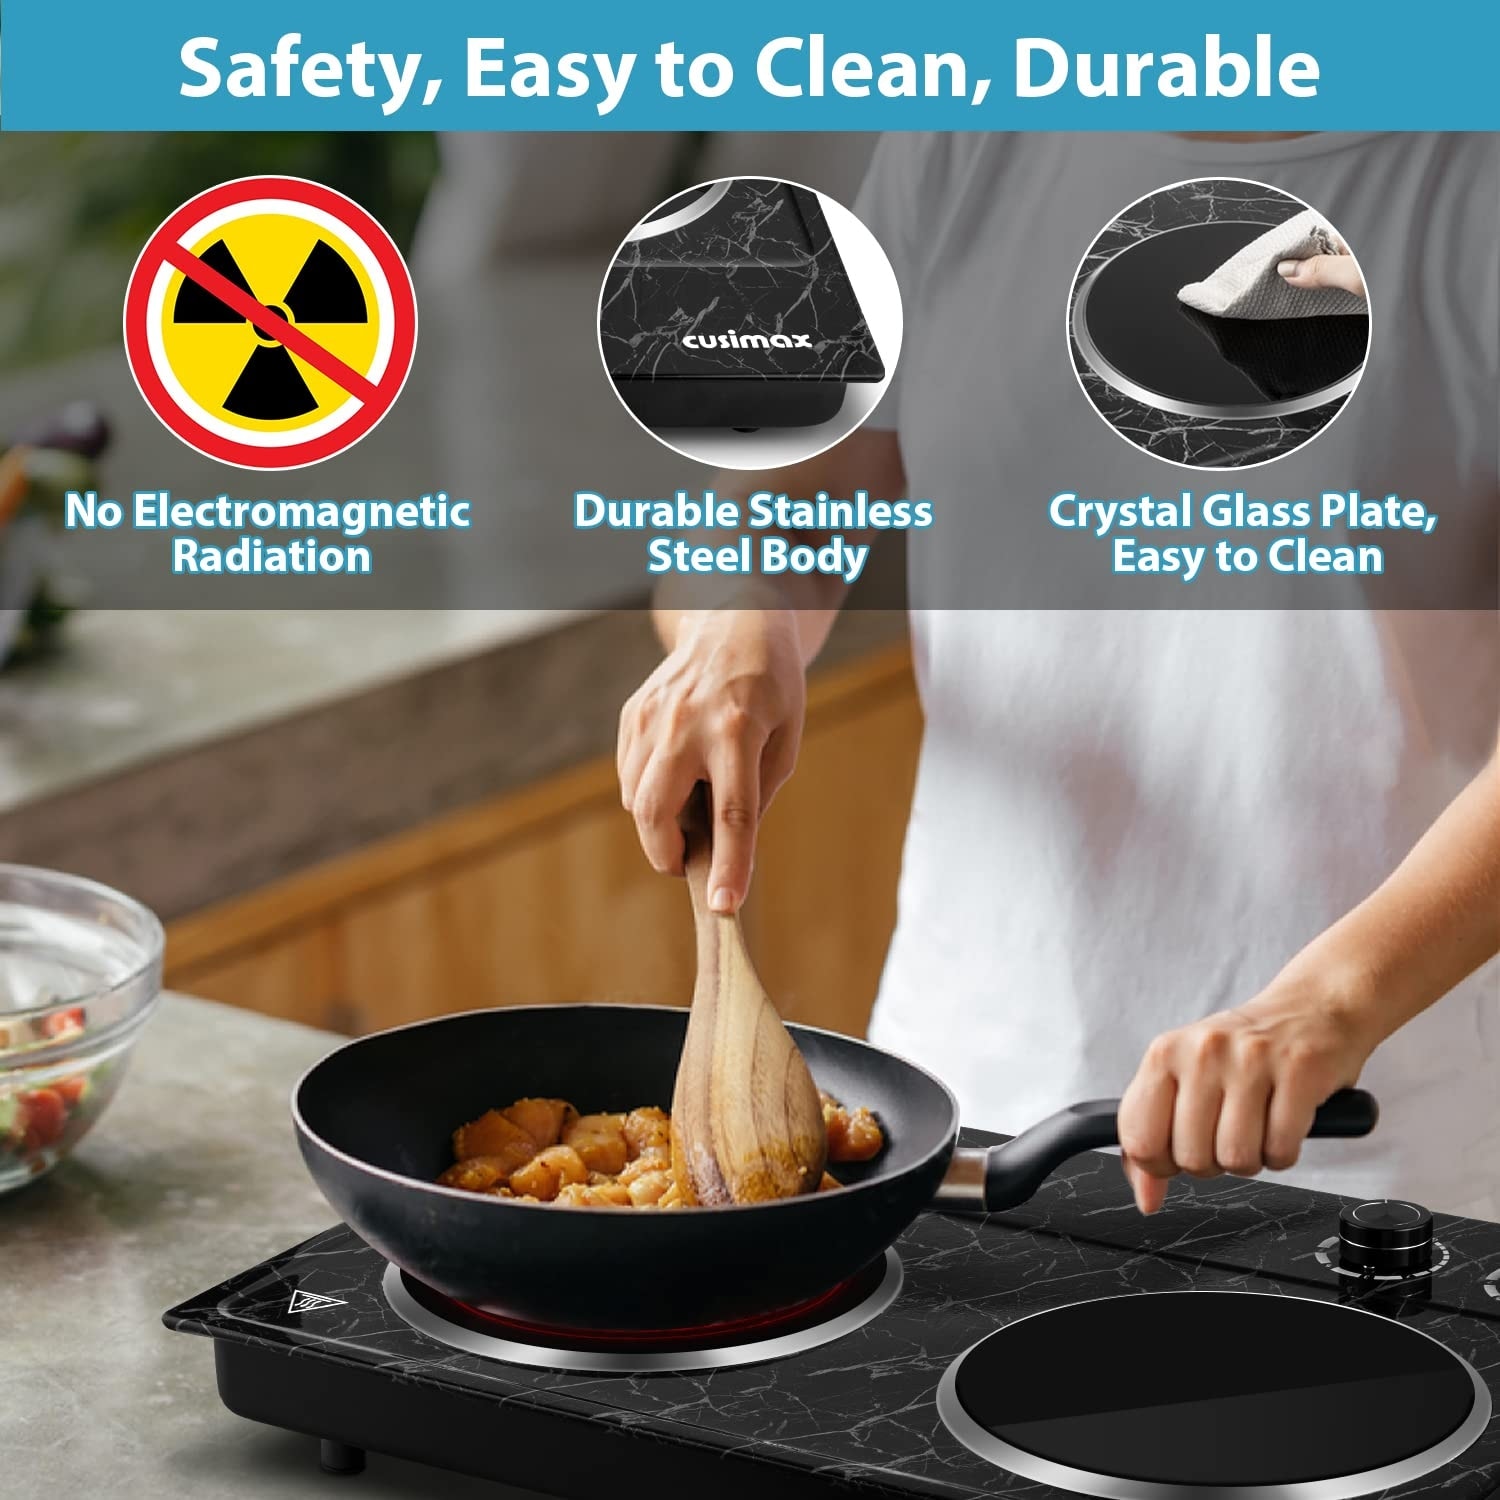 Elexnux 1800W Ceramic Electric Hot Plate for Cooking Portable Dual Control  Infrared Cooktop, Glass Plate Countertop Burner - On Sale - Bed Bath &  Beyond - 38103017